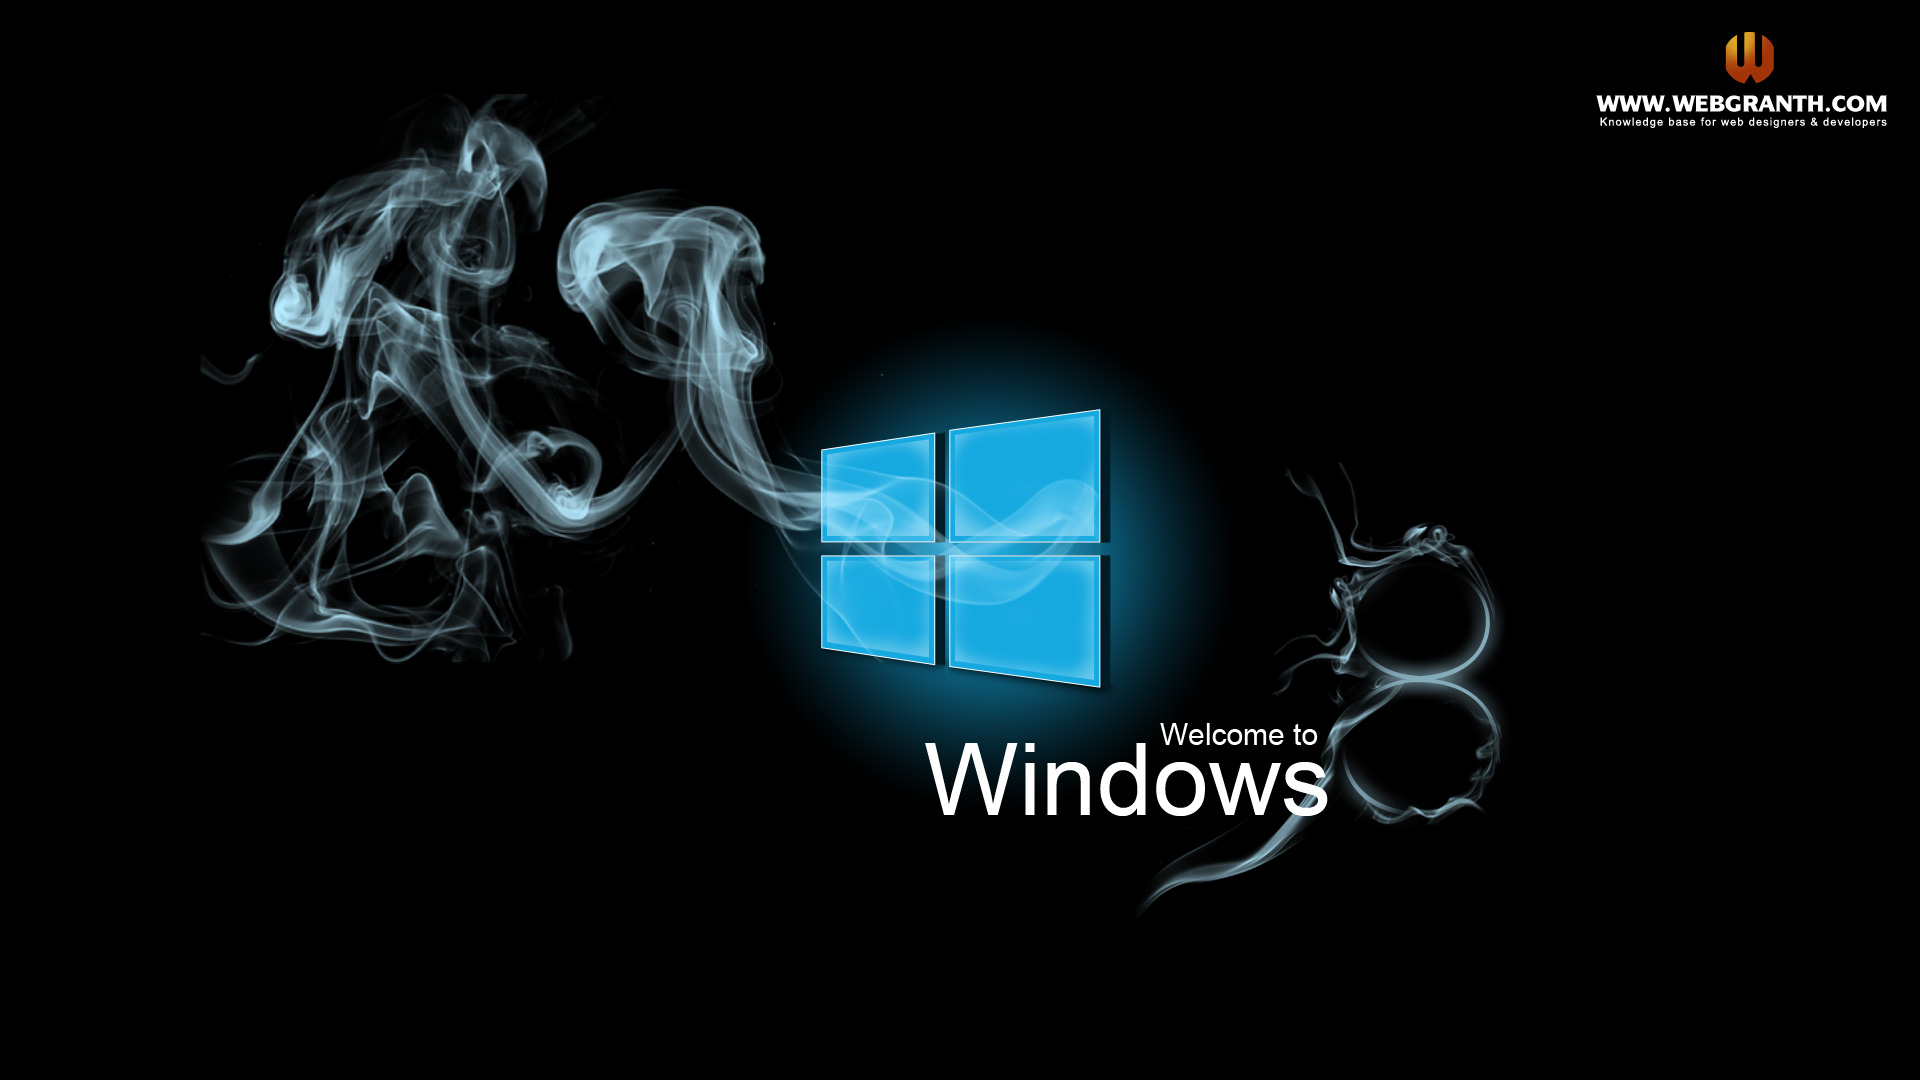 Free Windows 8 Wallpaper Backgrounds (2): View HD Image of Free ...